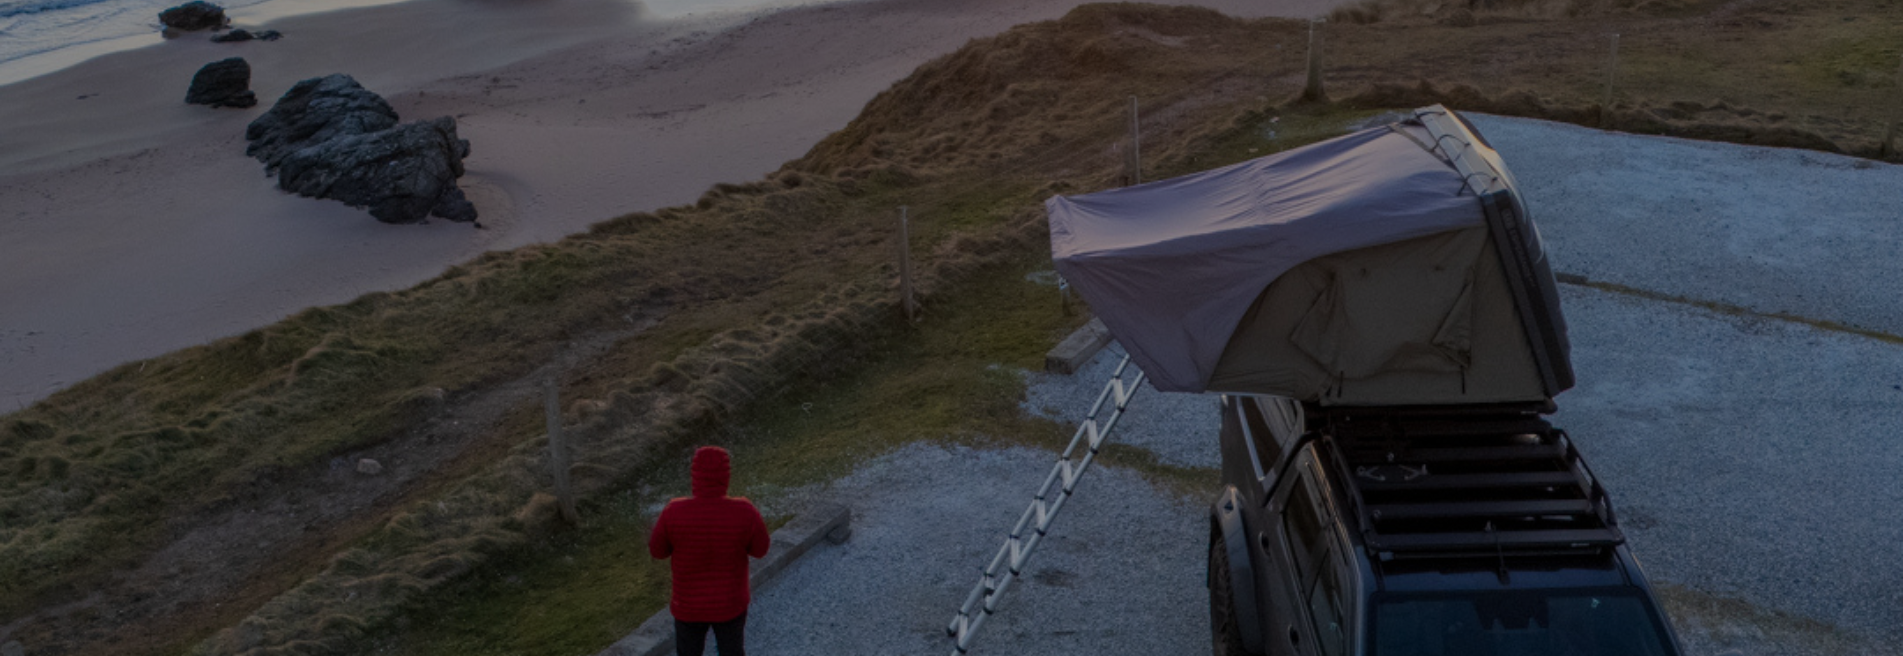 Camping NC500 in Roof Tent